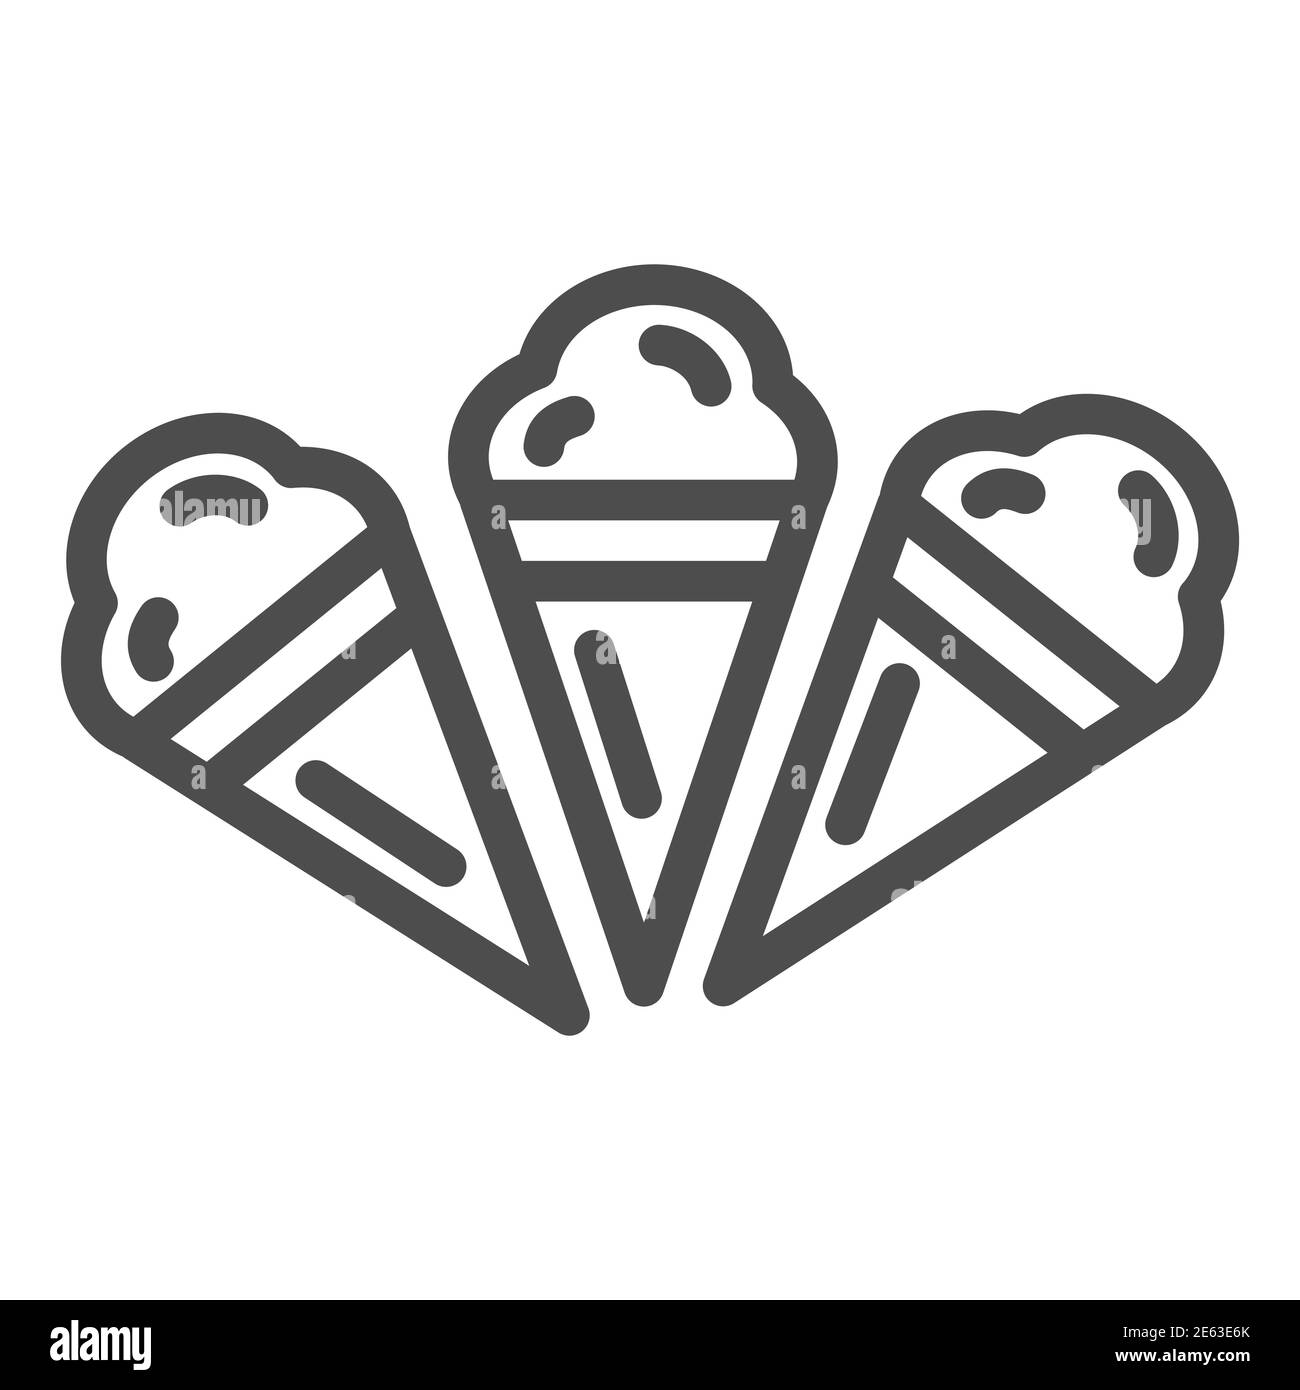 Three ice creams line icon, Summer concept, Set of ice cream cones sign on white background, Ice-cream icon in outline style for mobile concept and Stock Vector